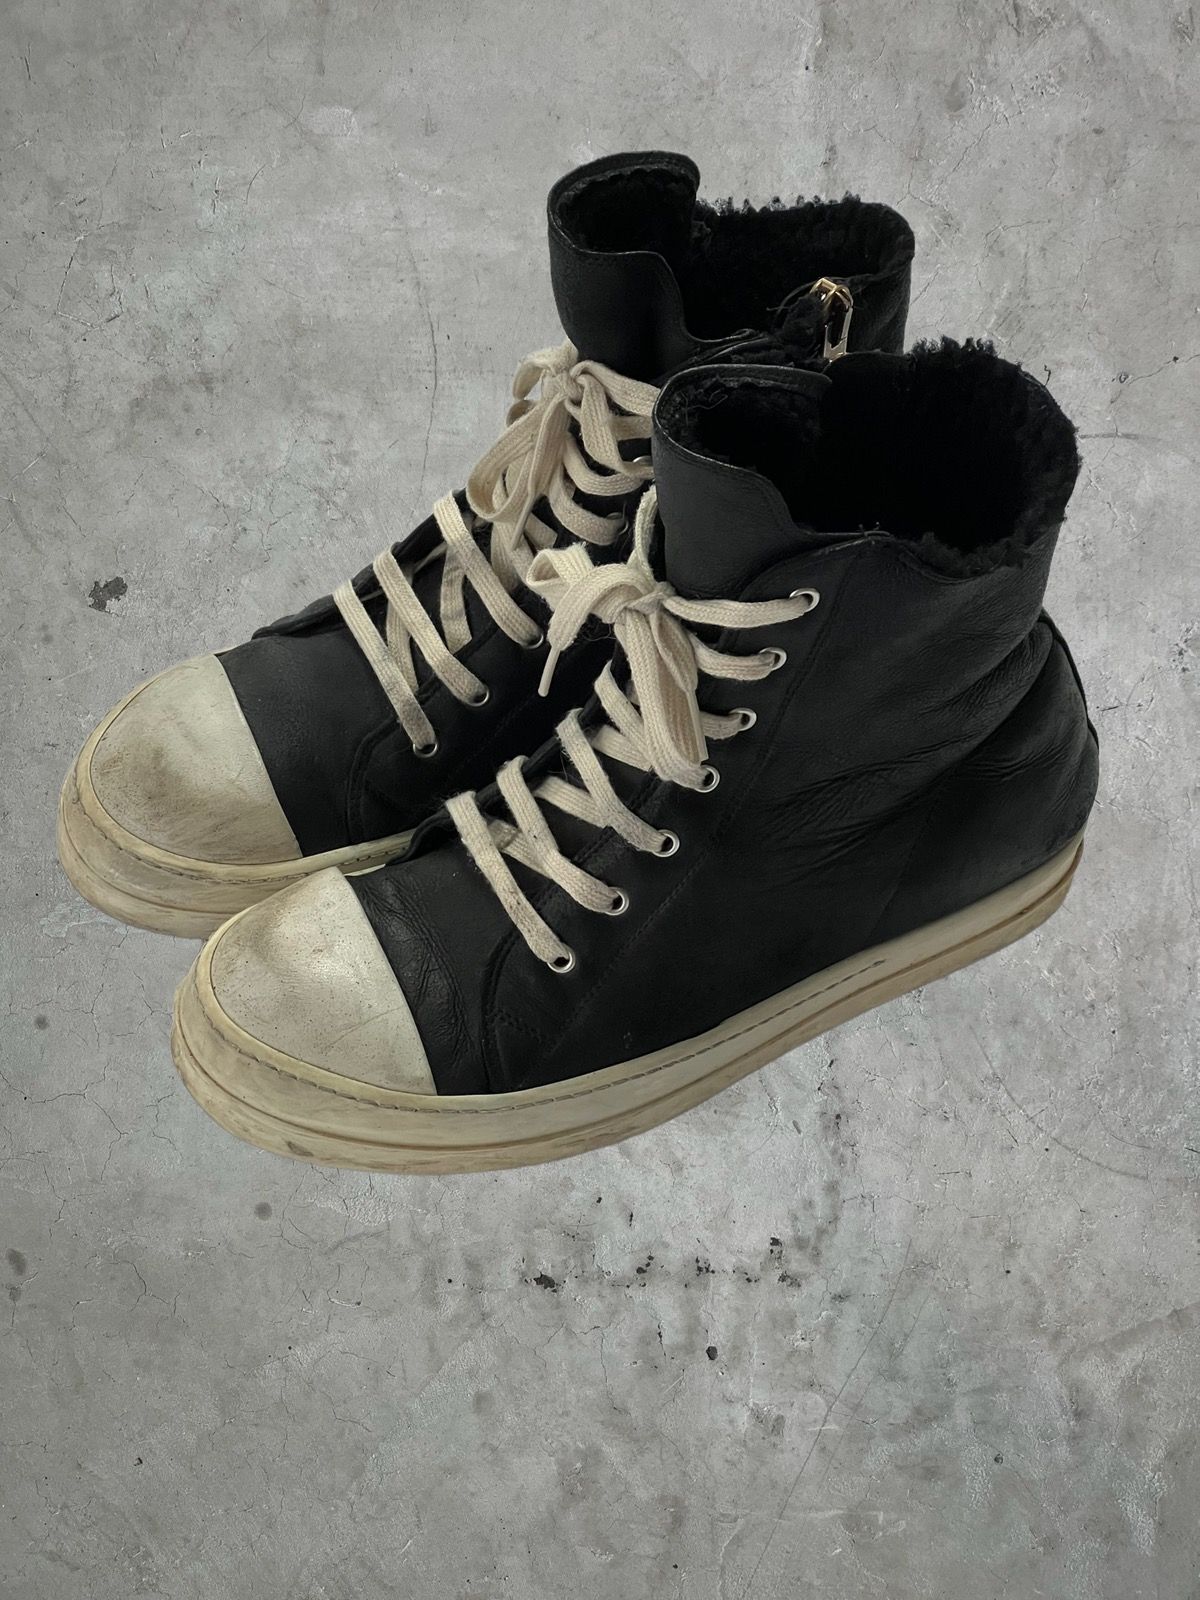 Rick Owens Rick Owens Mainline Leather / Shearling Ramones Size US 10 / EU 43 - 1 Preview